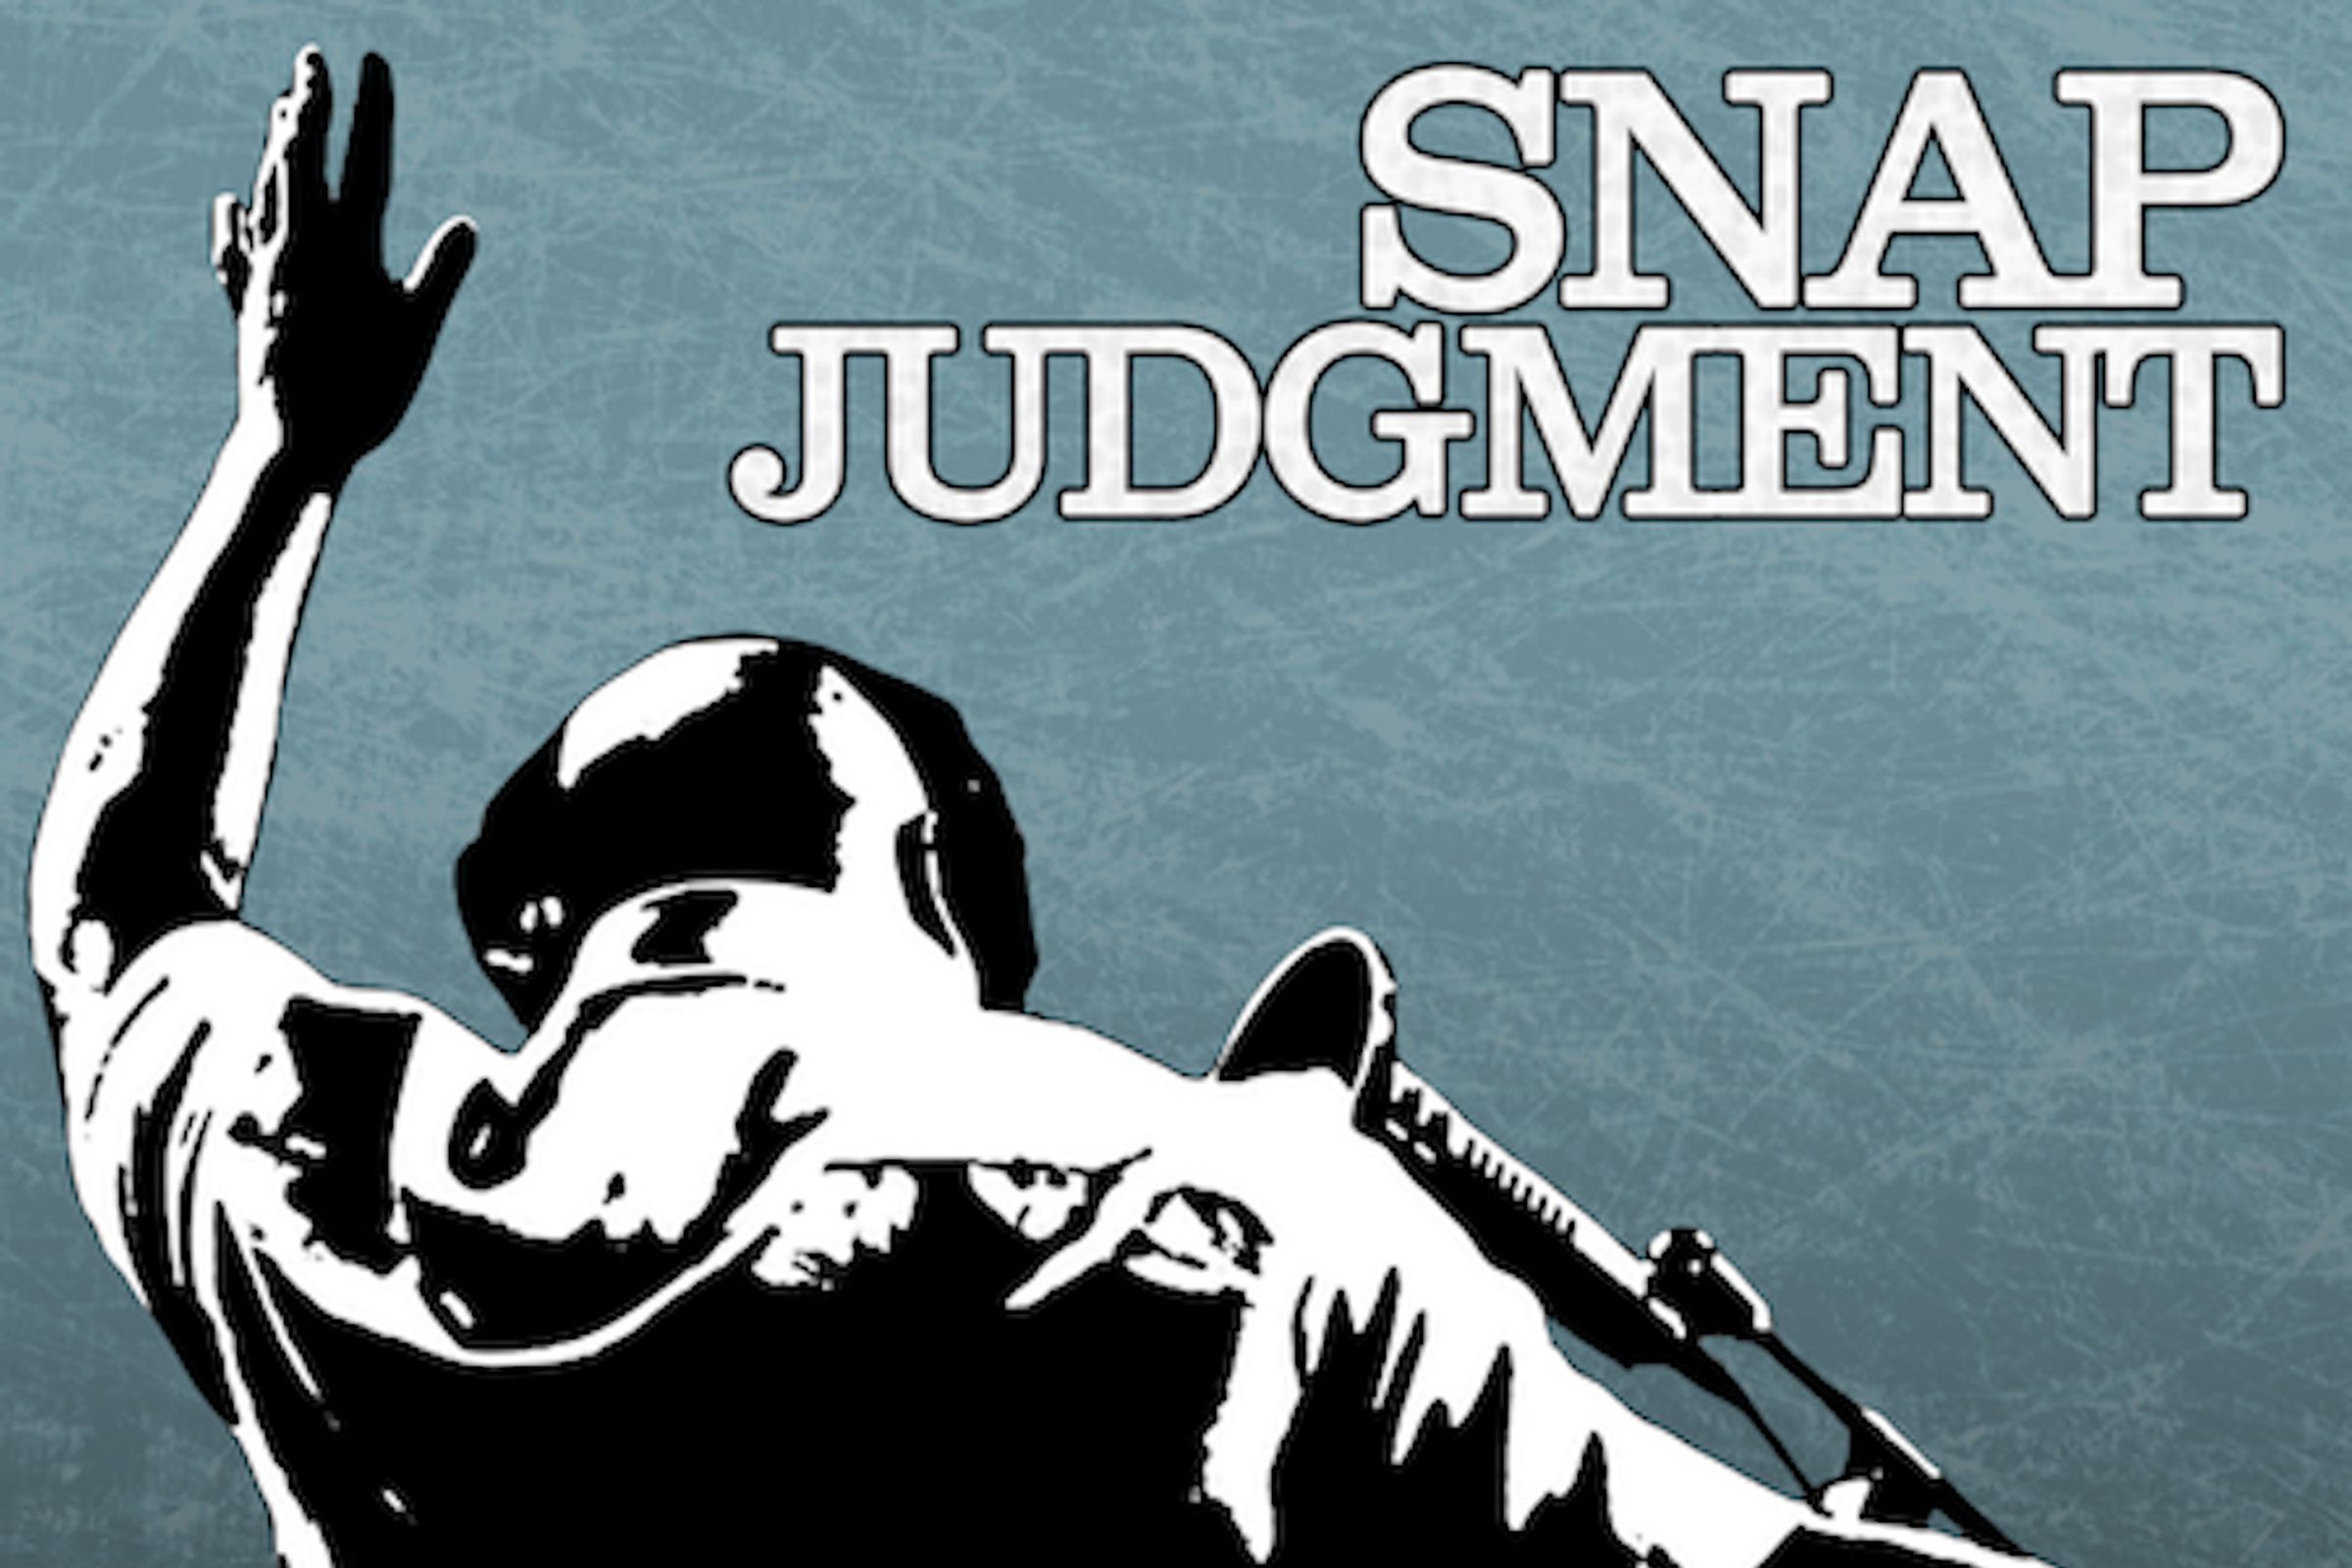 The podcast cover art for Snap Judgement.